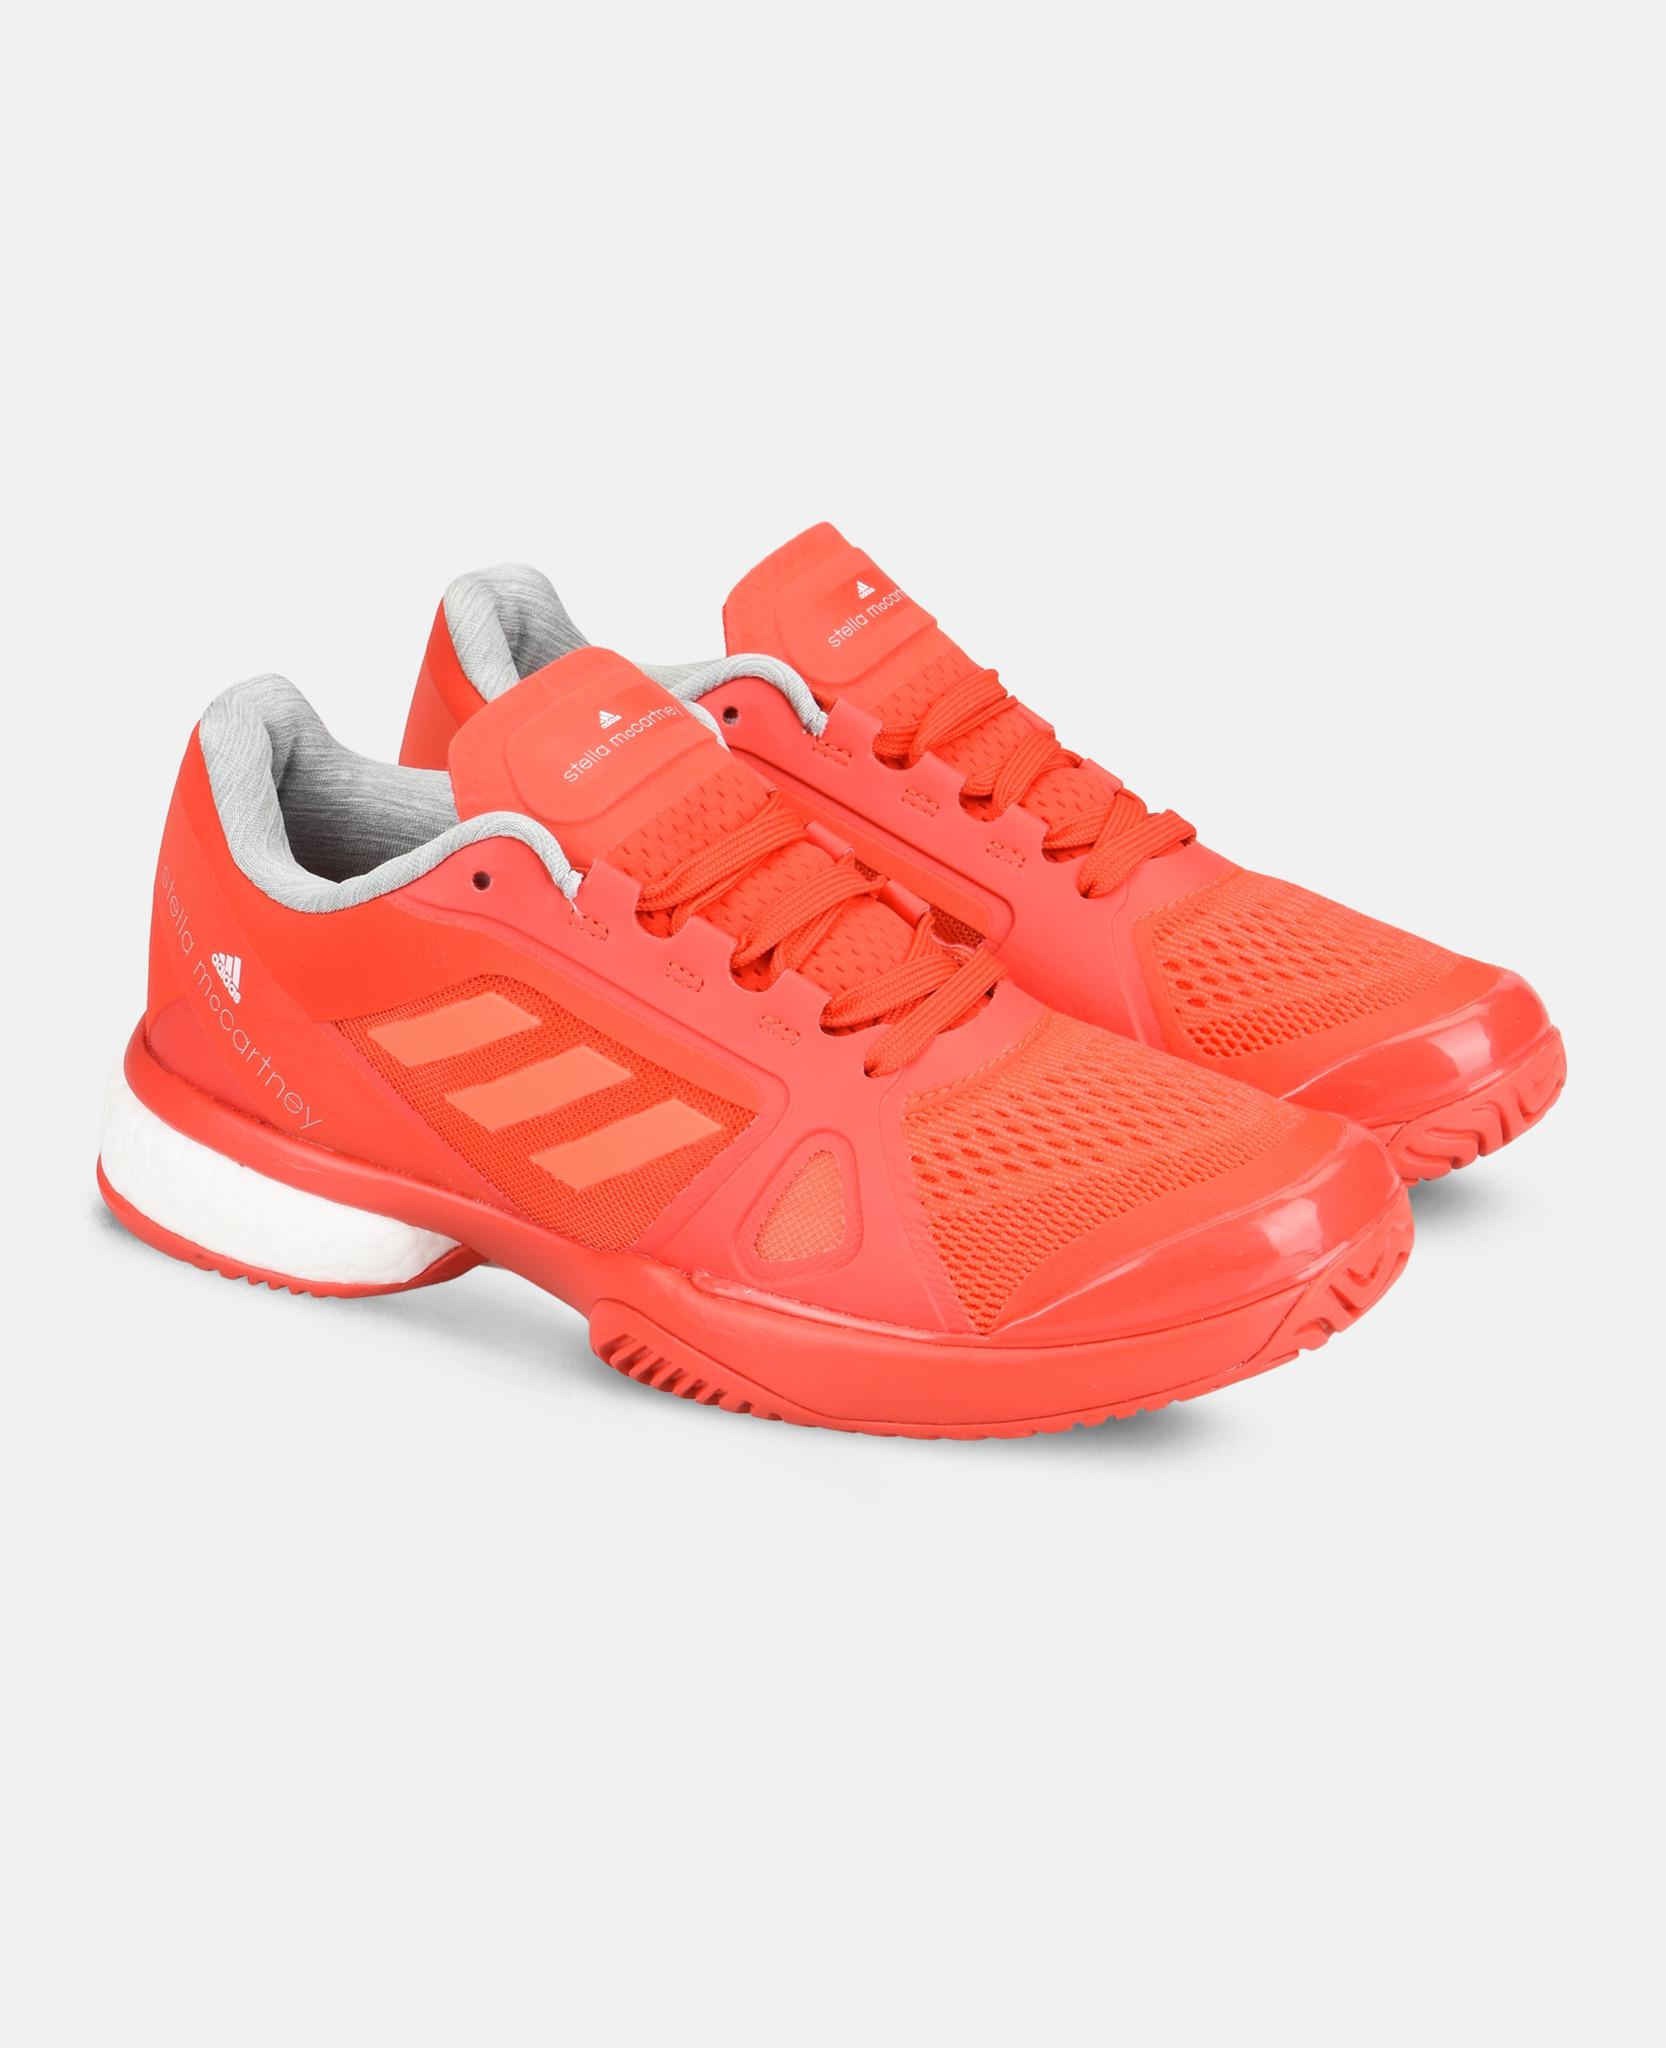 adidas By Stella McCartney Rubber Red Boost Barricade Tennis Shoes | Lyst